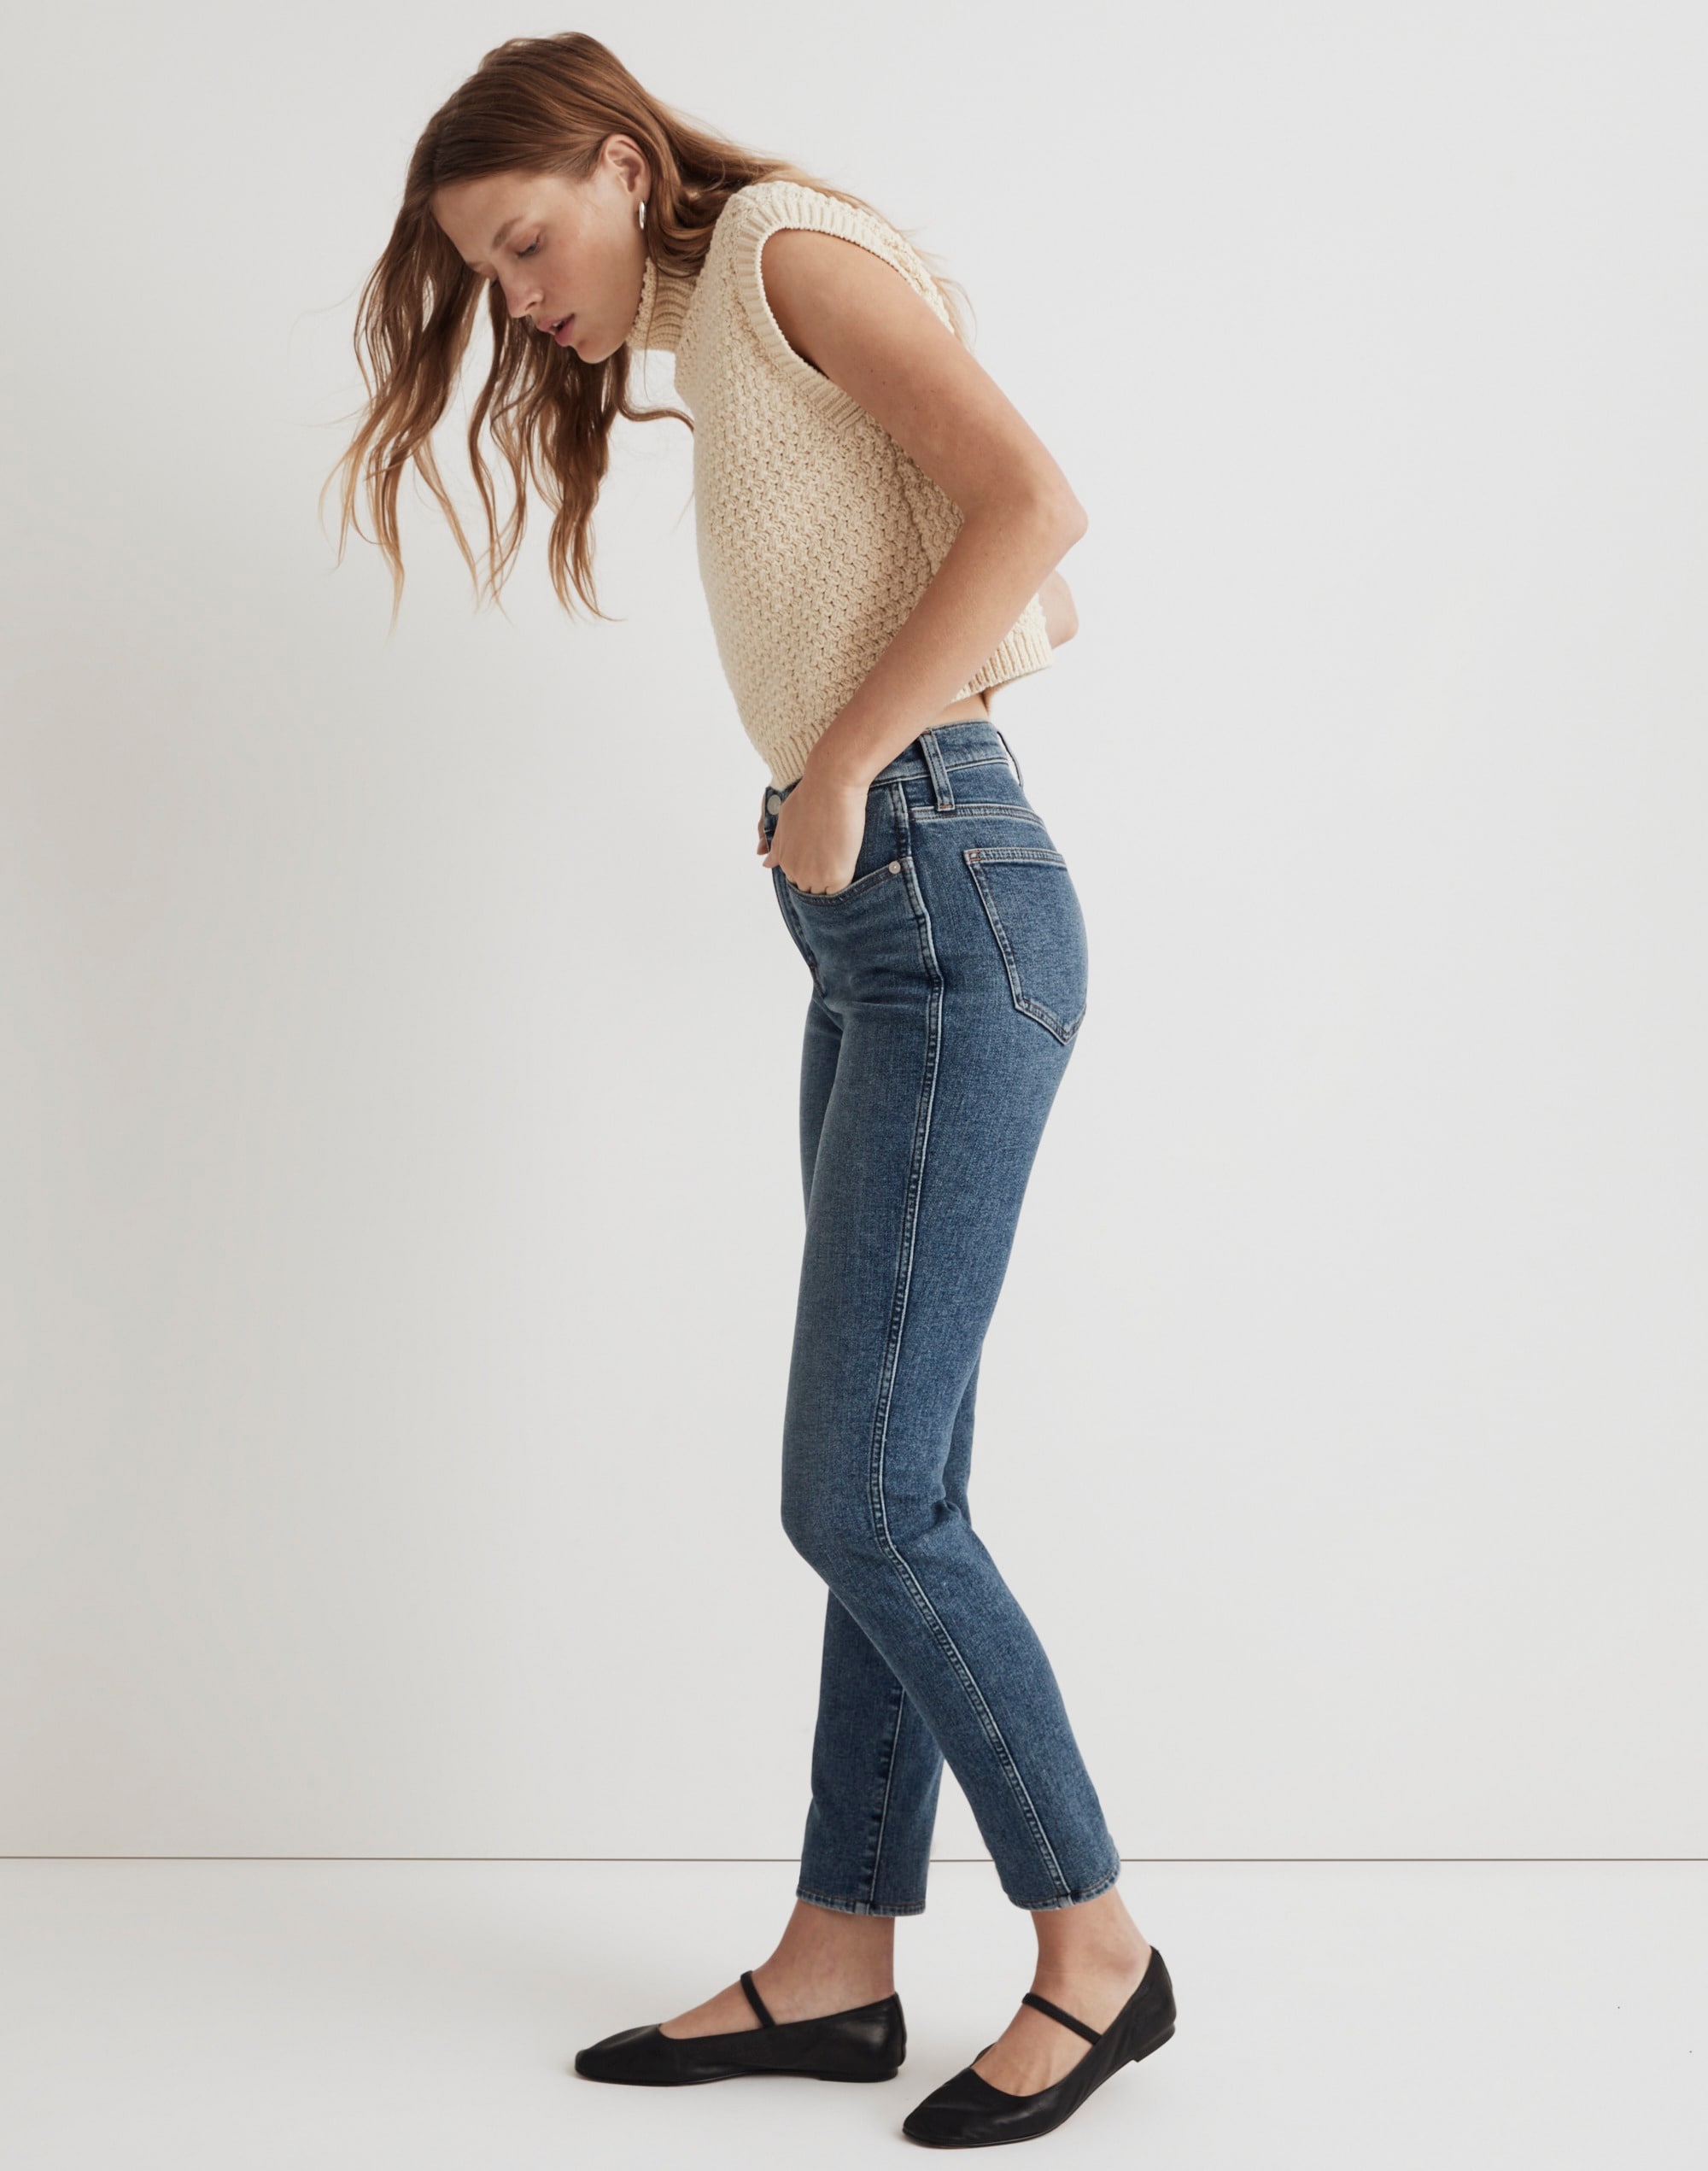 Stovepipe Full-Length Jeans in Vinter Wash: Instacozy Edition